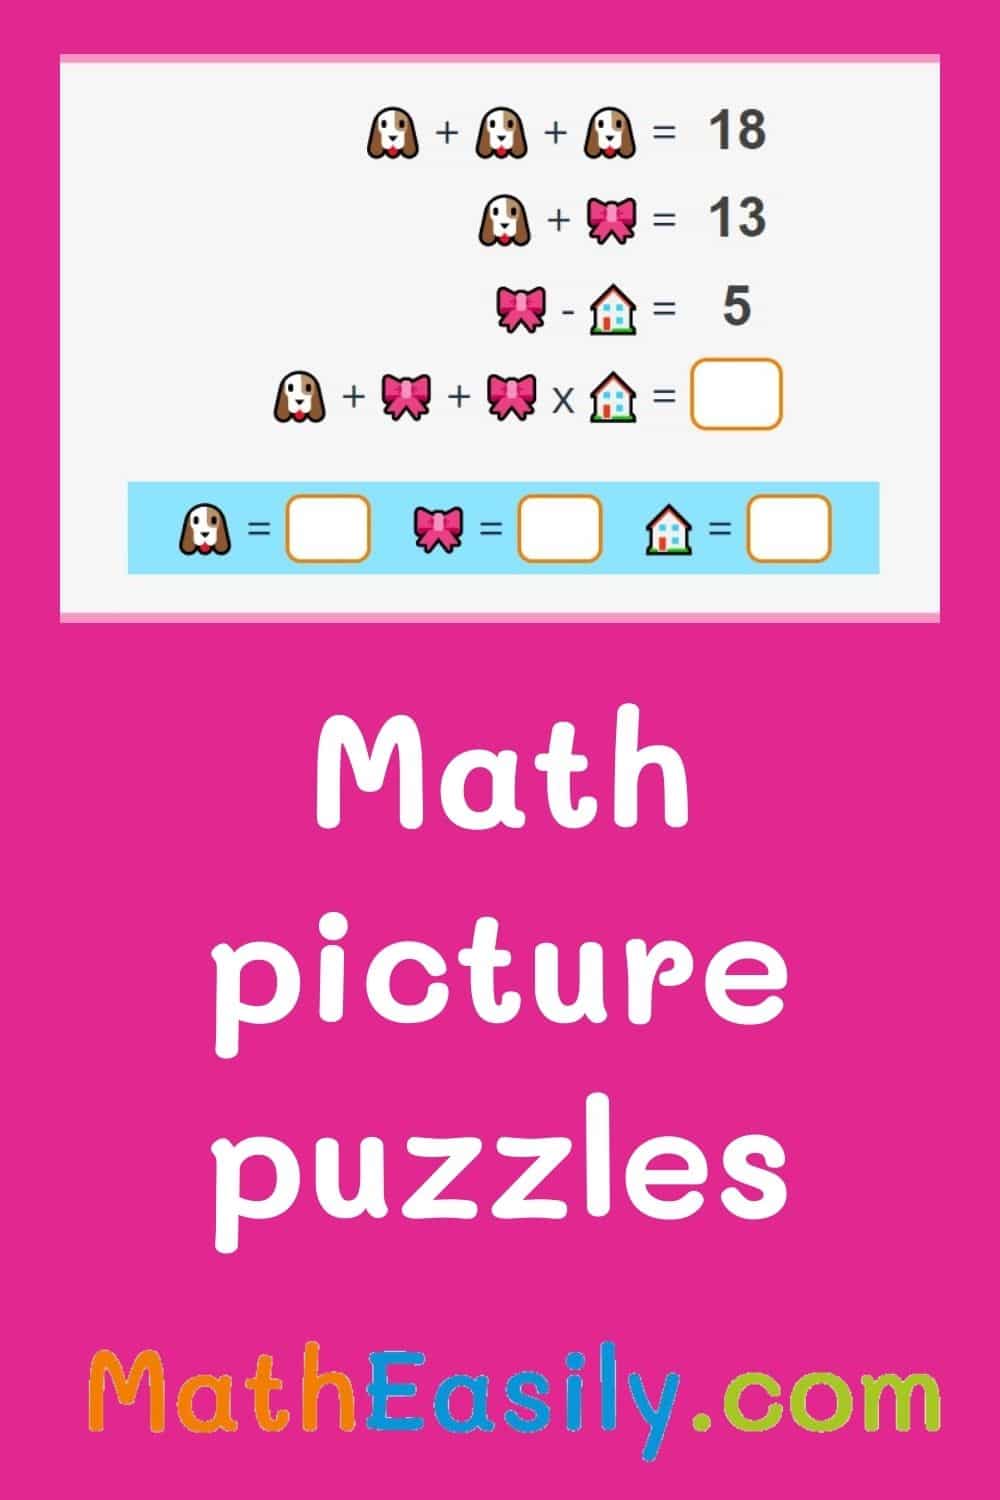 mathematical puzzles. Free math puzzles with answers PDF. maths puzzle questions.